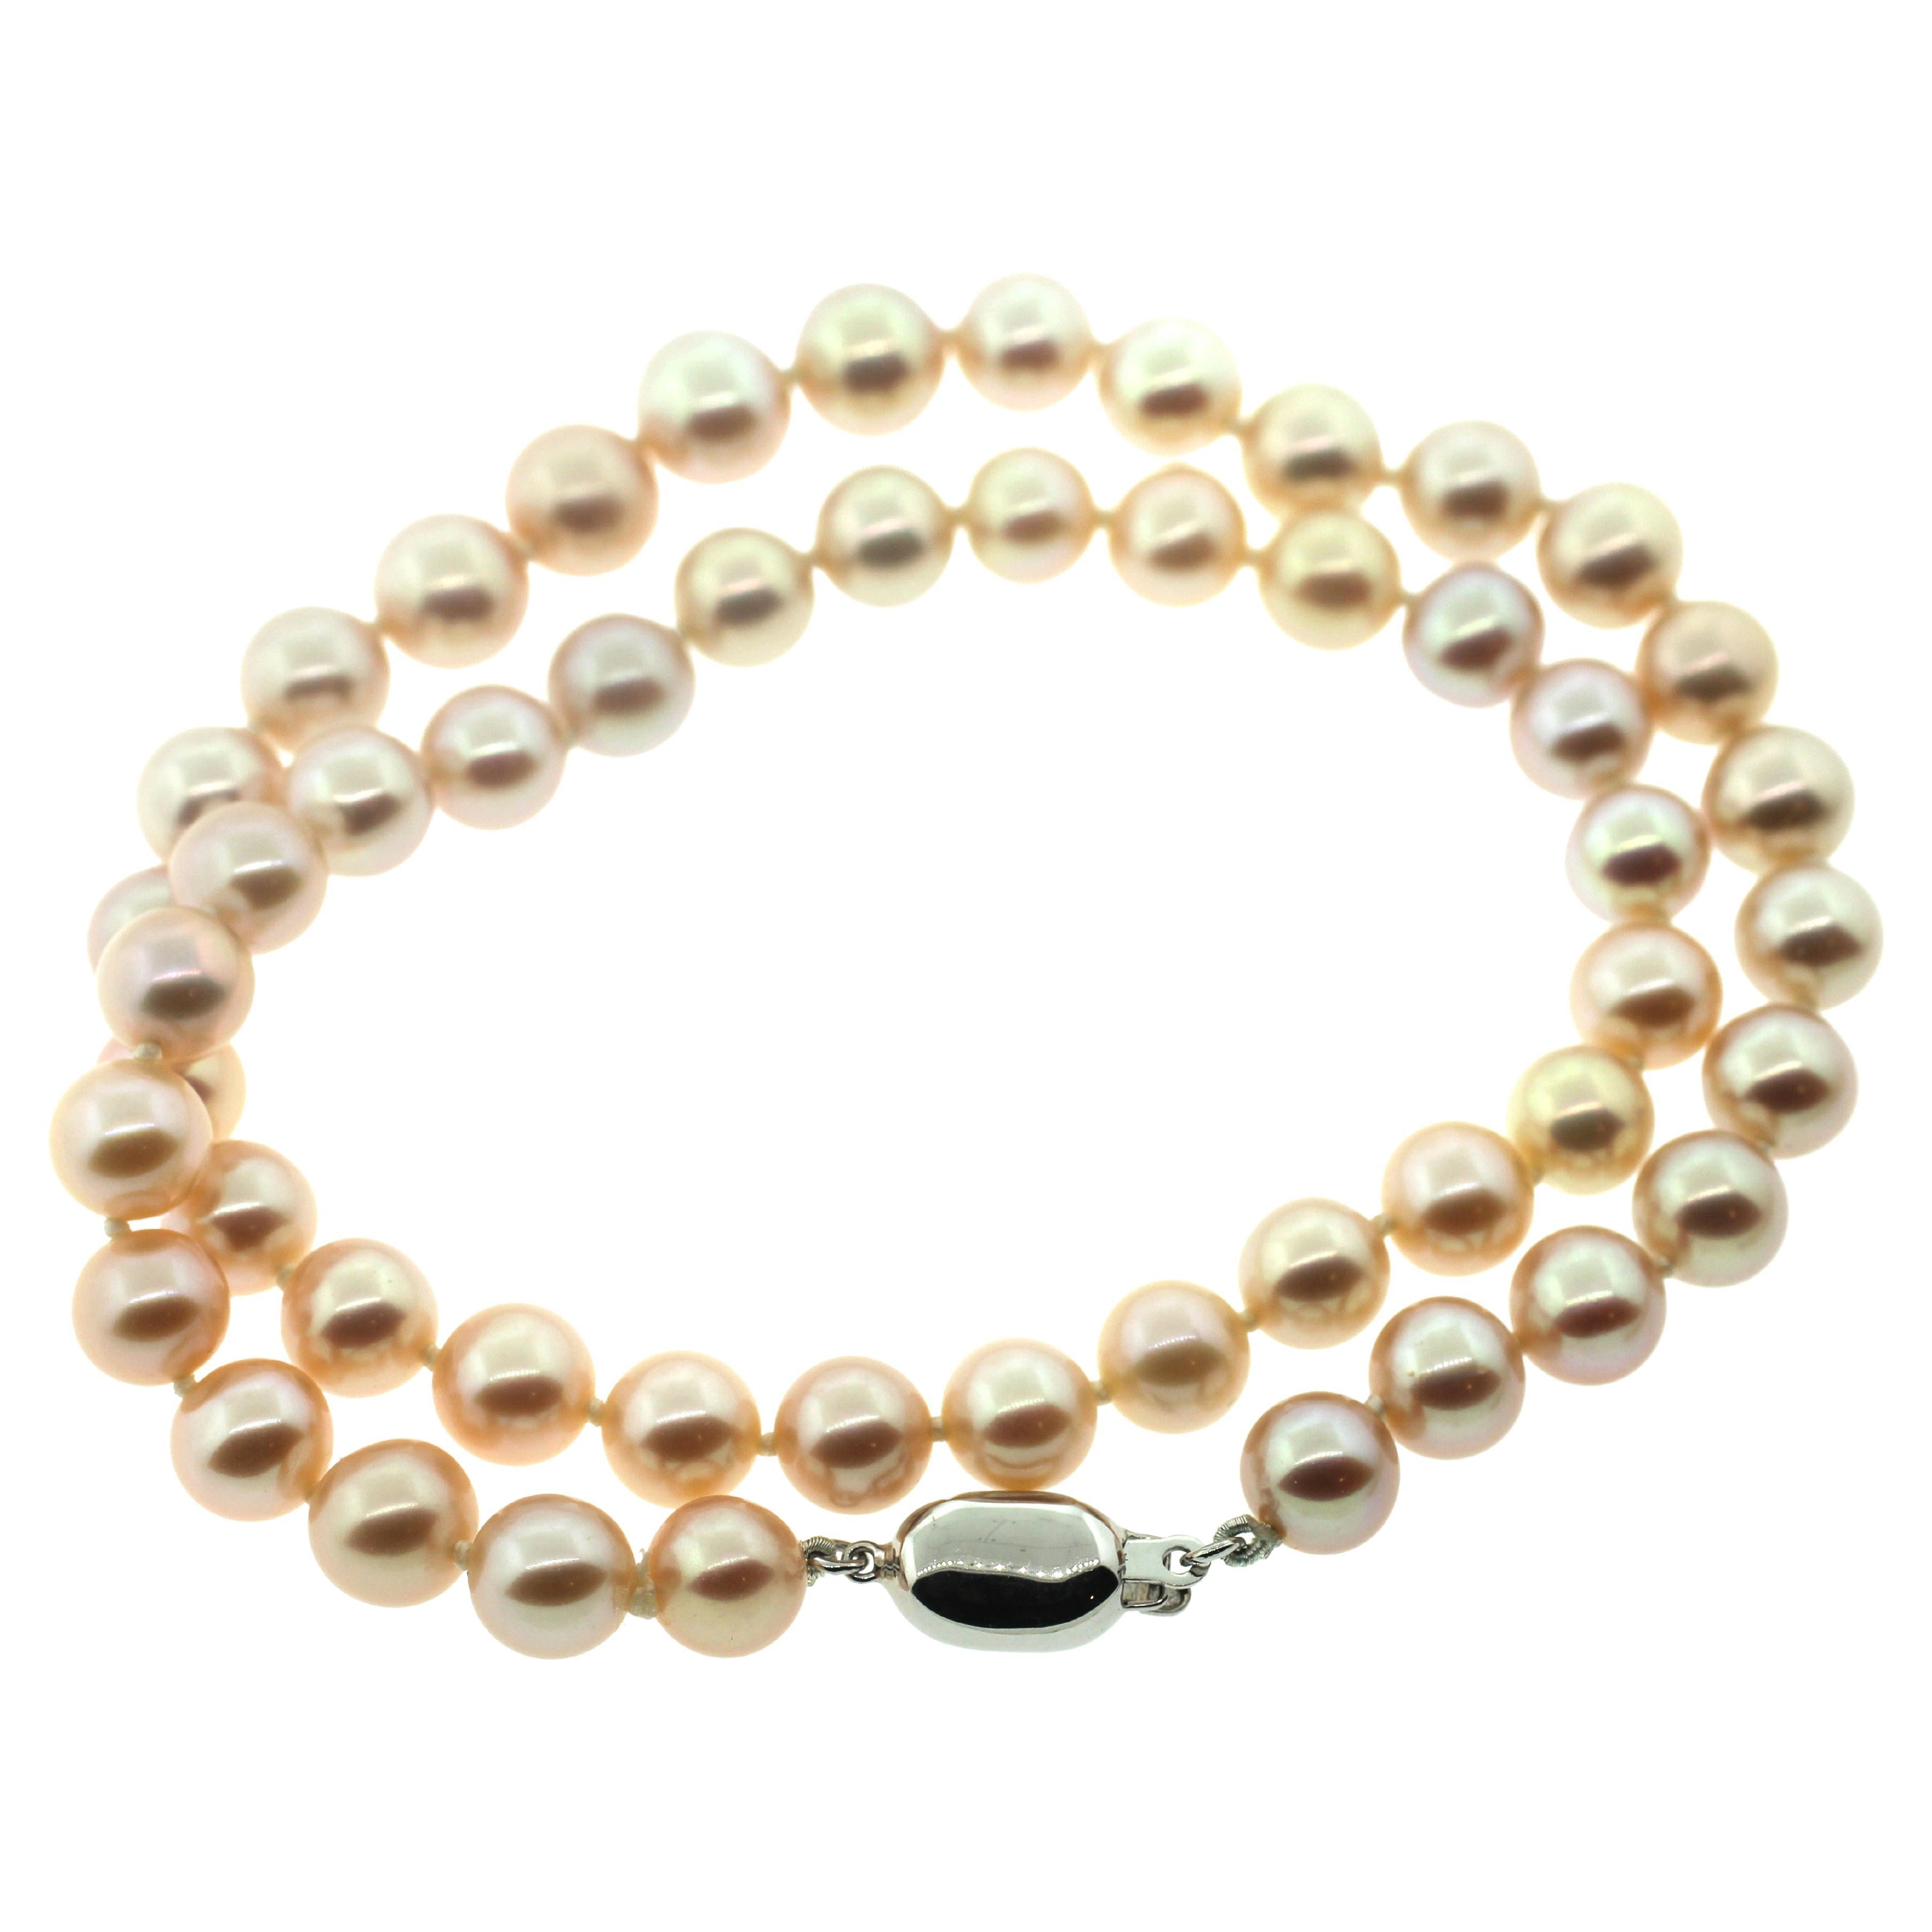 Hakimoto Pink Cultured Pearl Necklace
18K Clacp
17.5 inches
8-7mm
All measurements and sizes and color And description are approximate 